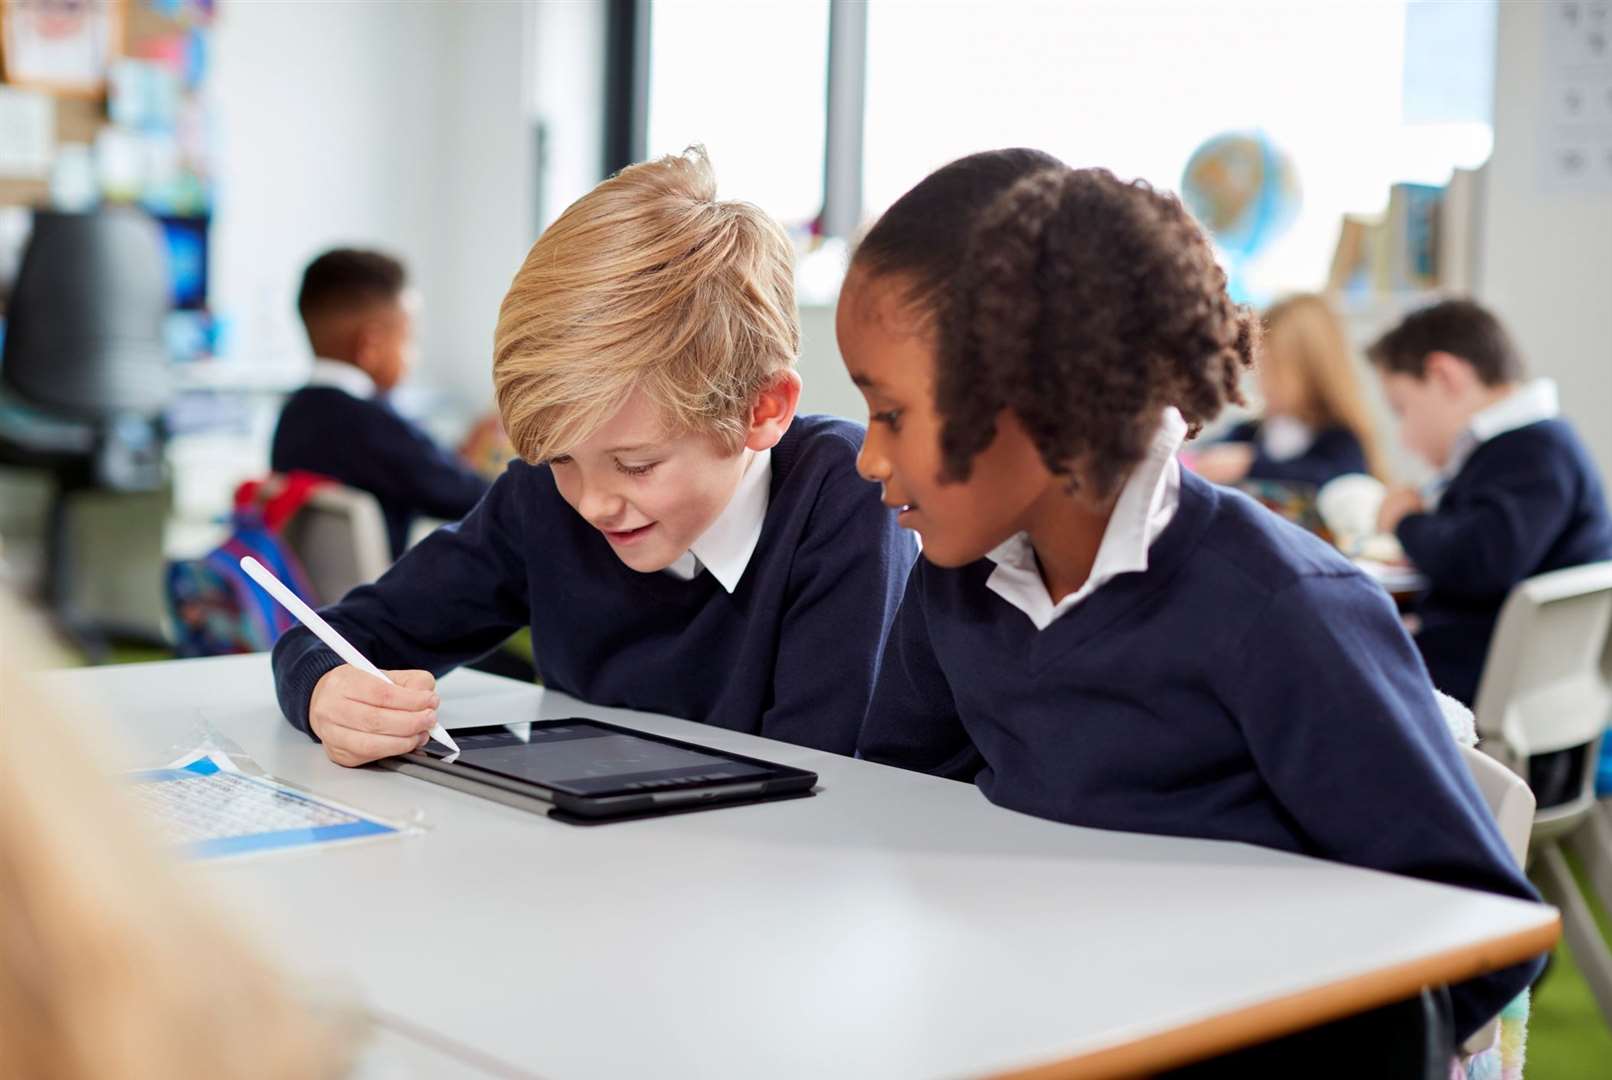 Do your children take some time to adjust to the return to school? Image: iStock.